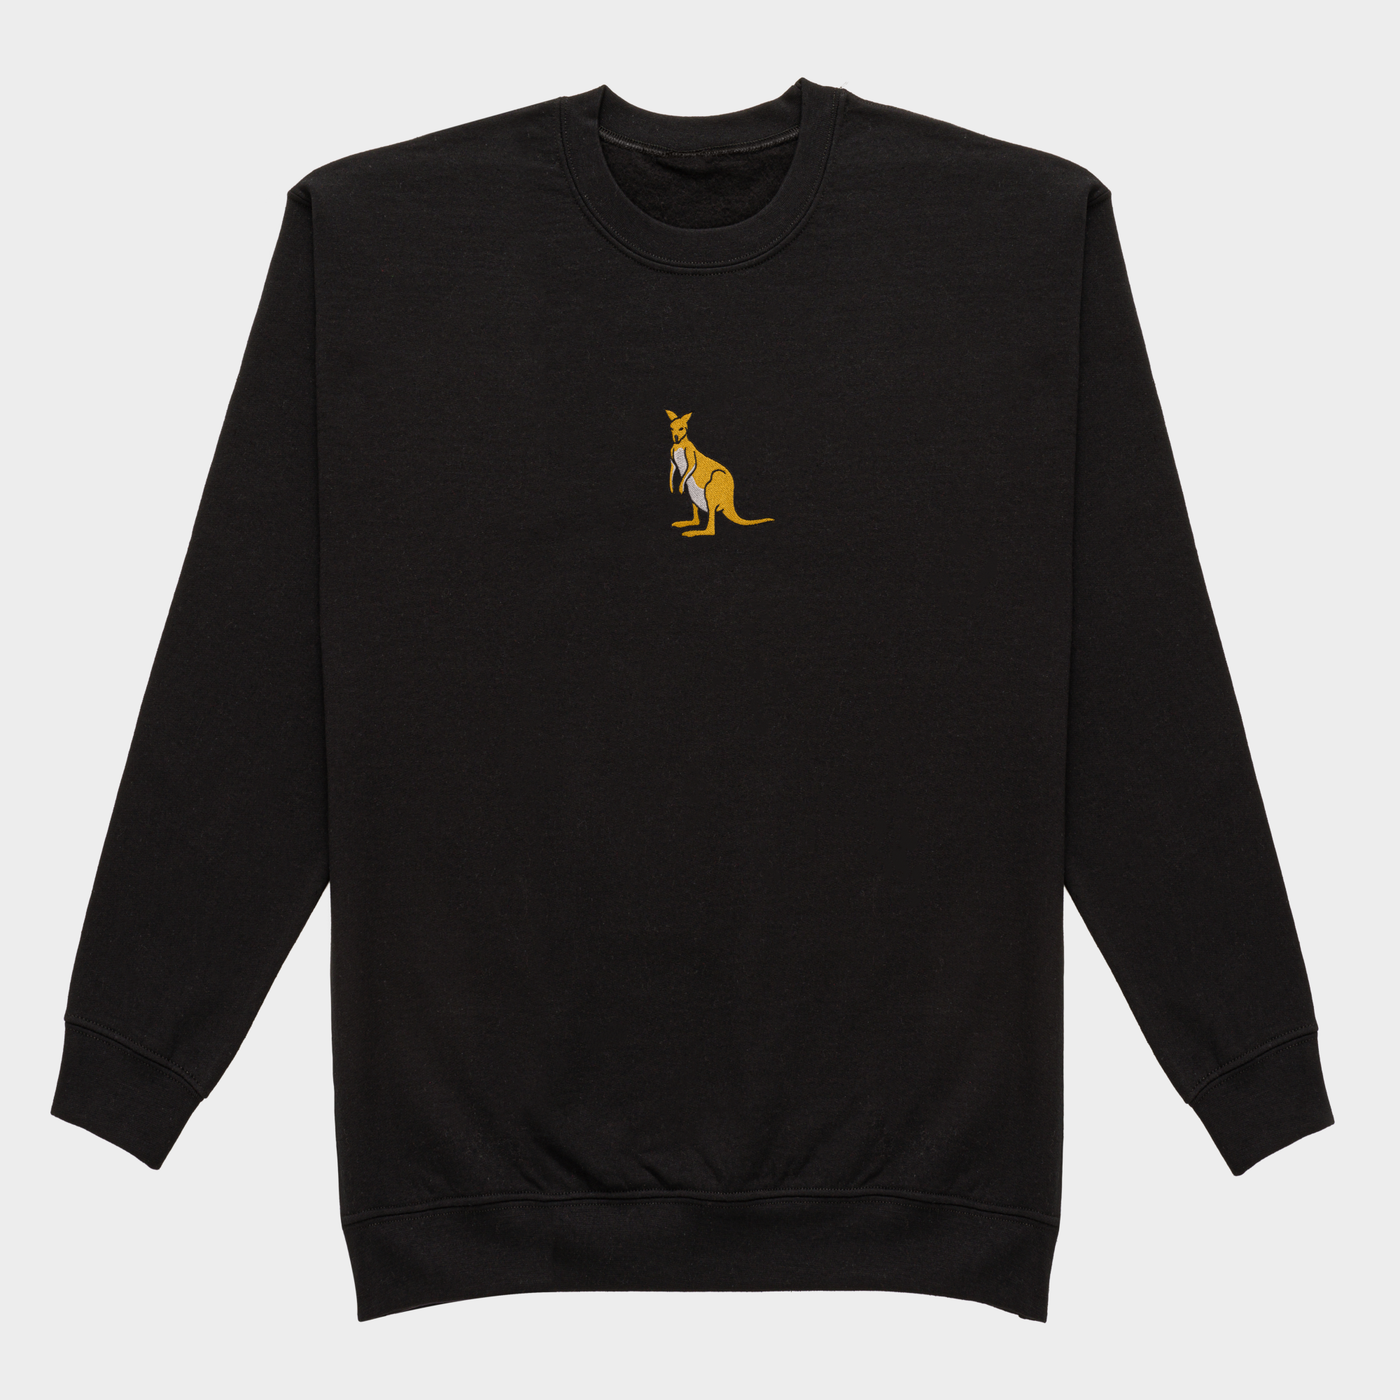 Bobby's Planet Men's Embroidered Kangaroo Sweatshirt from Australia Down Under Animals Collection in Black Color#color_black